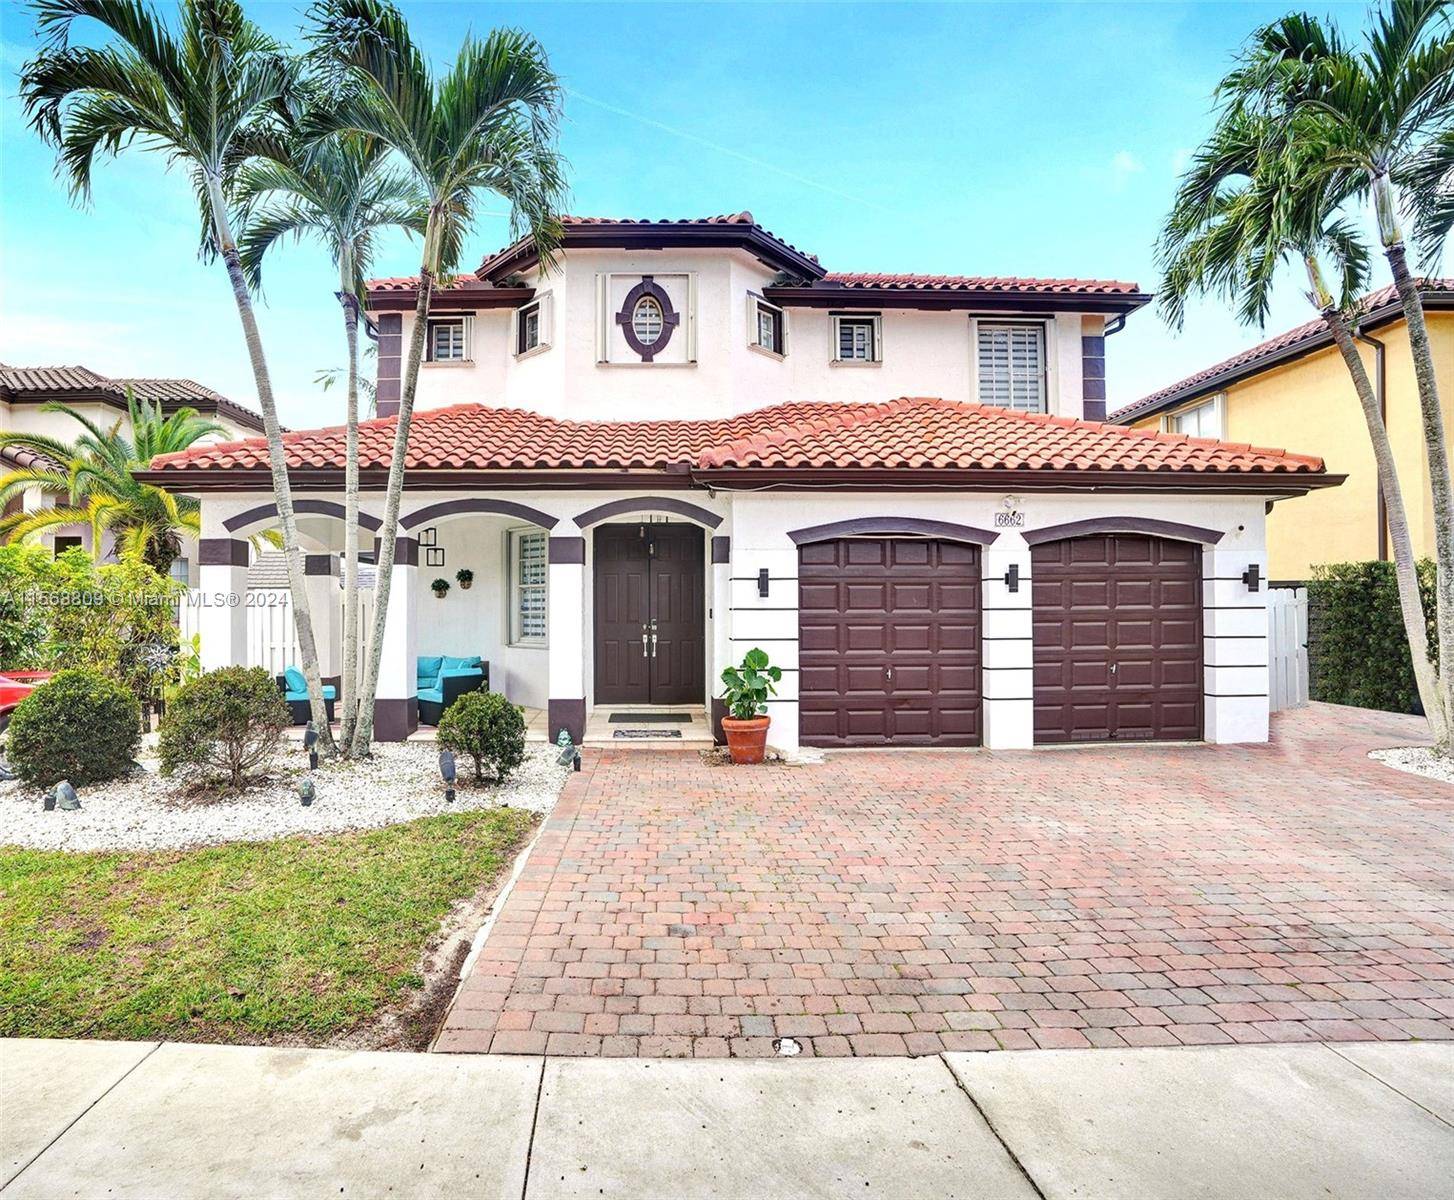 SPECTULAR POOL HOME IS NESTLED IN A PALM TREE LINED STREET IN AN EXCELLENT UPSCALE COMMUNITY 2 STORY HOME FEATURES HIGH VOLUME CEILING ELEGANT ENTRY WITH CONTEMPORARY GEOMETRIC CHANDELIERS ZEBRA ...